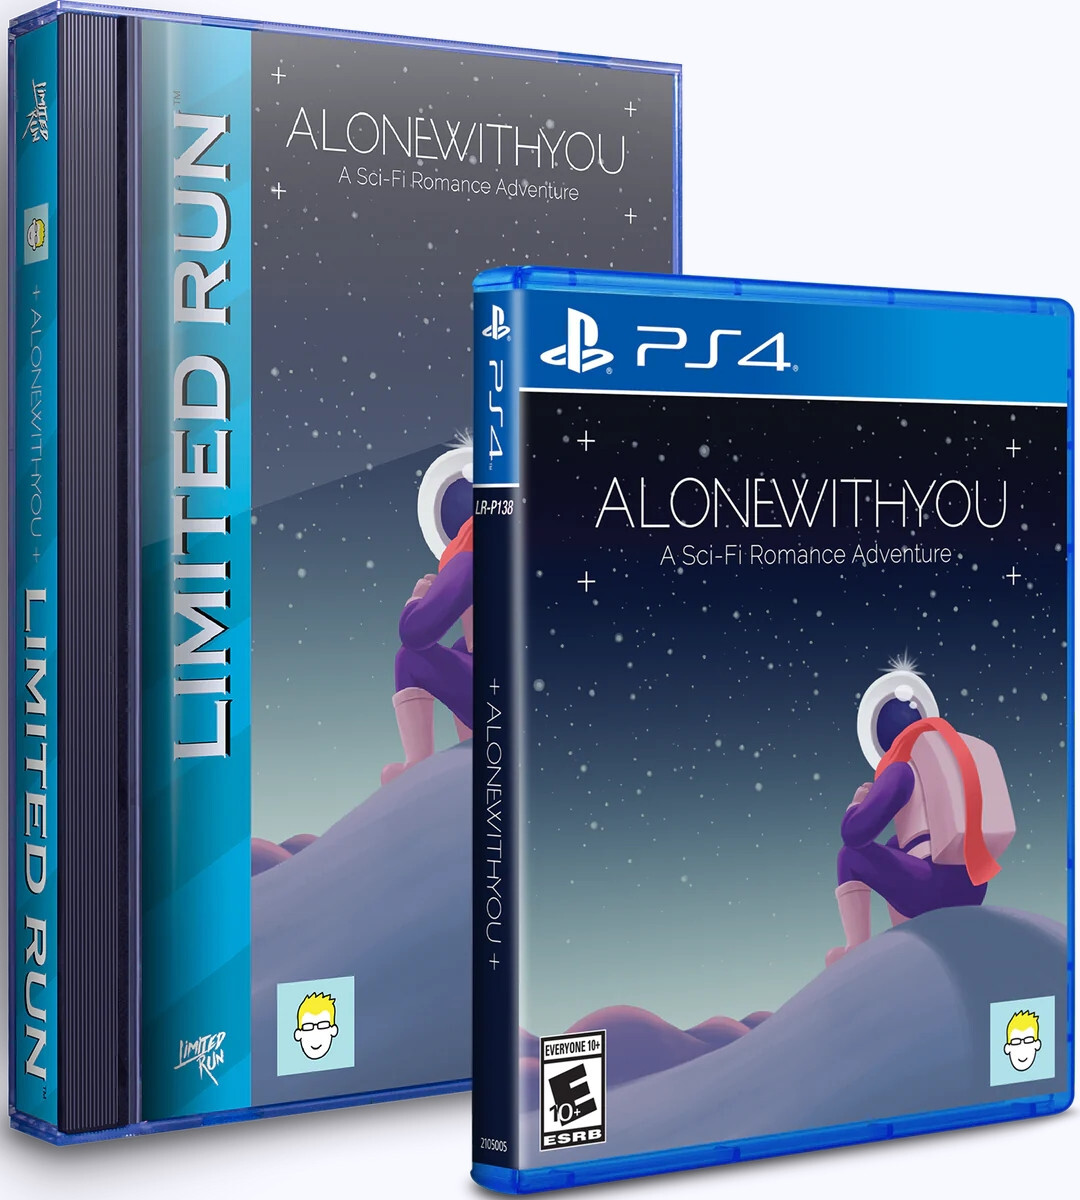 Limited Run alone with you classic edition games) PlayStation 4